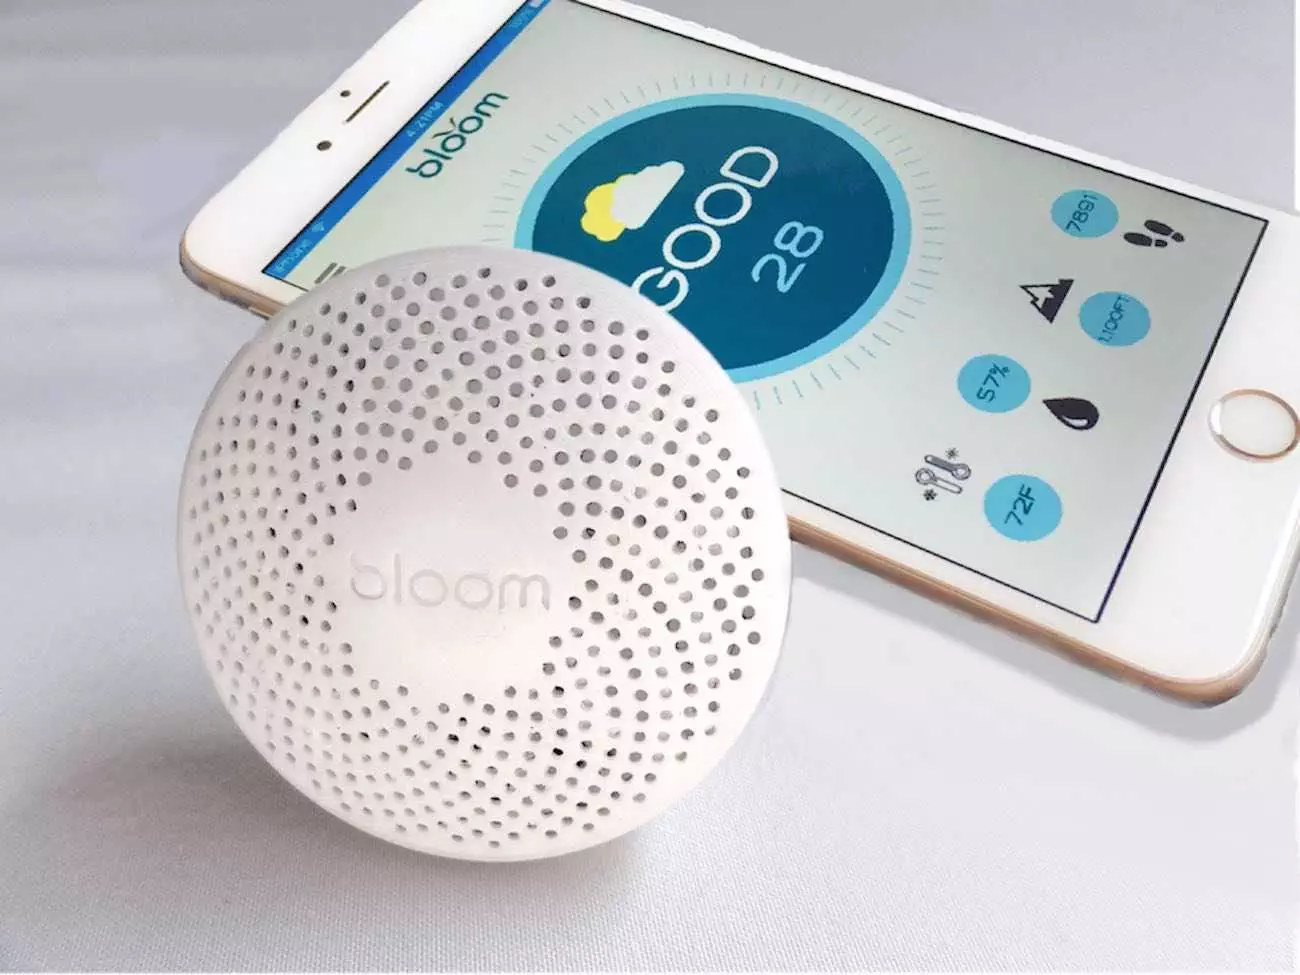 Bloom Portable Air Quality Monitor Lying Side By Side With A Smartphone